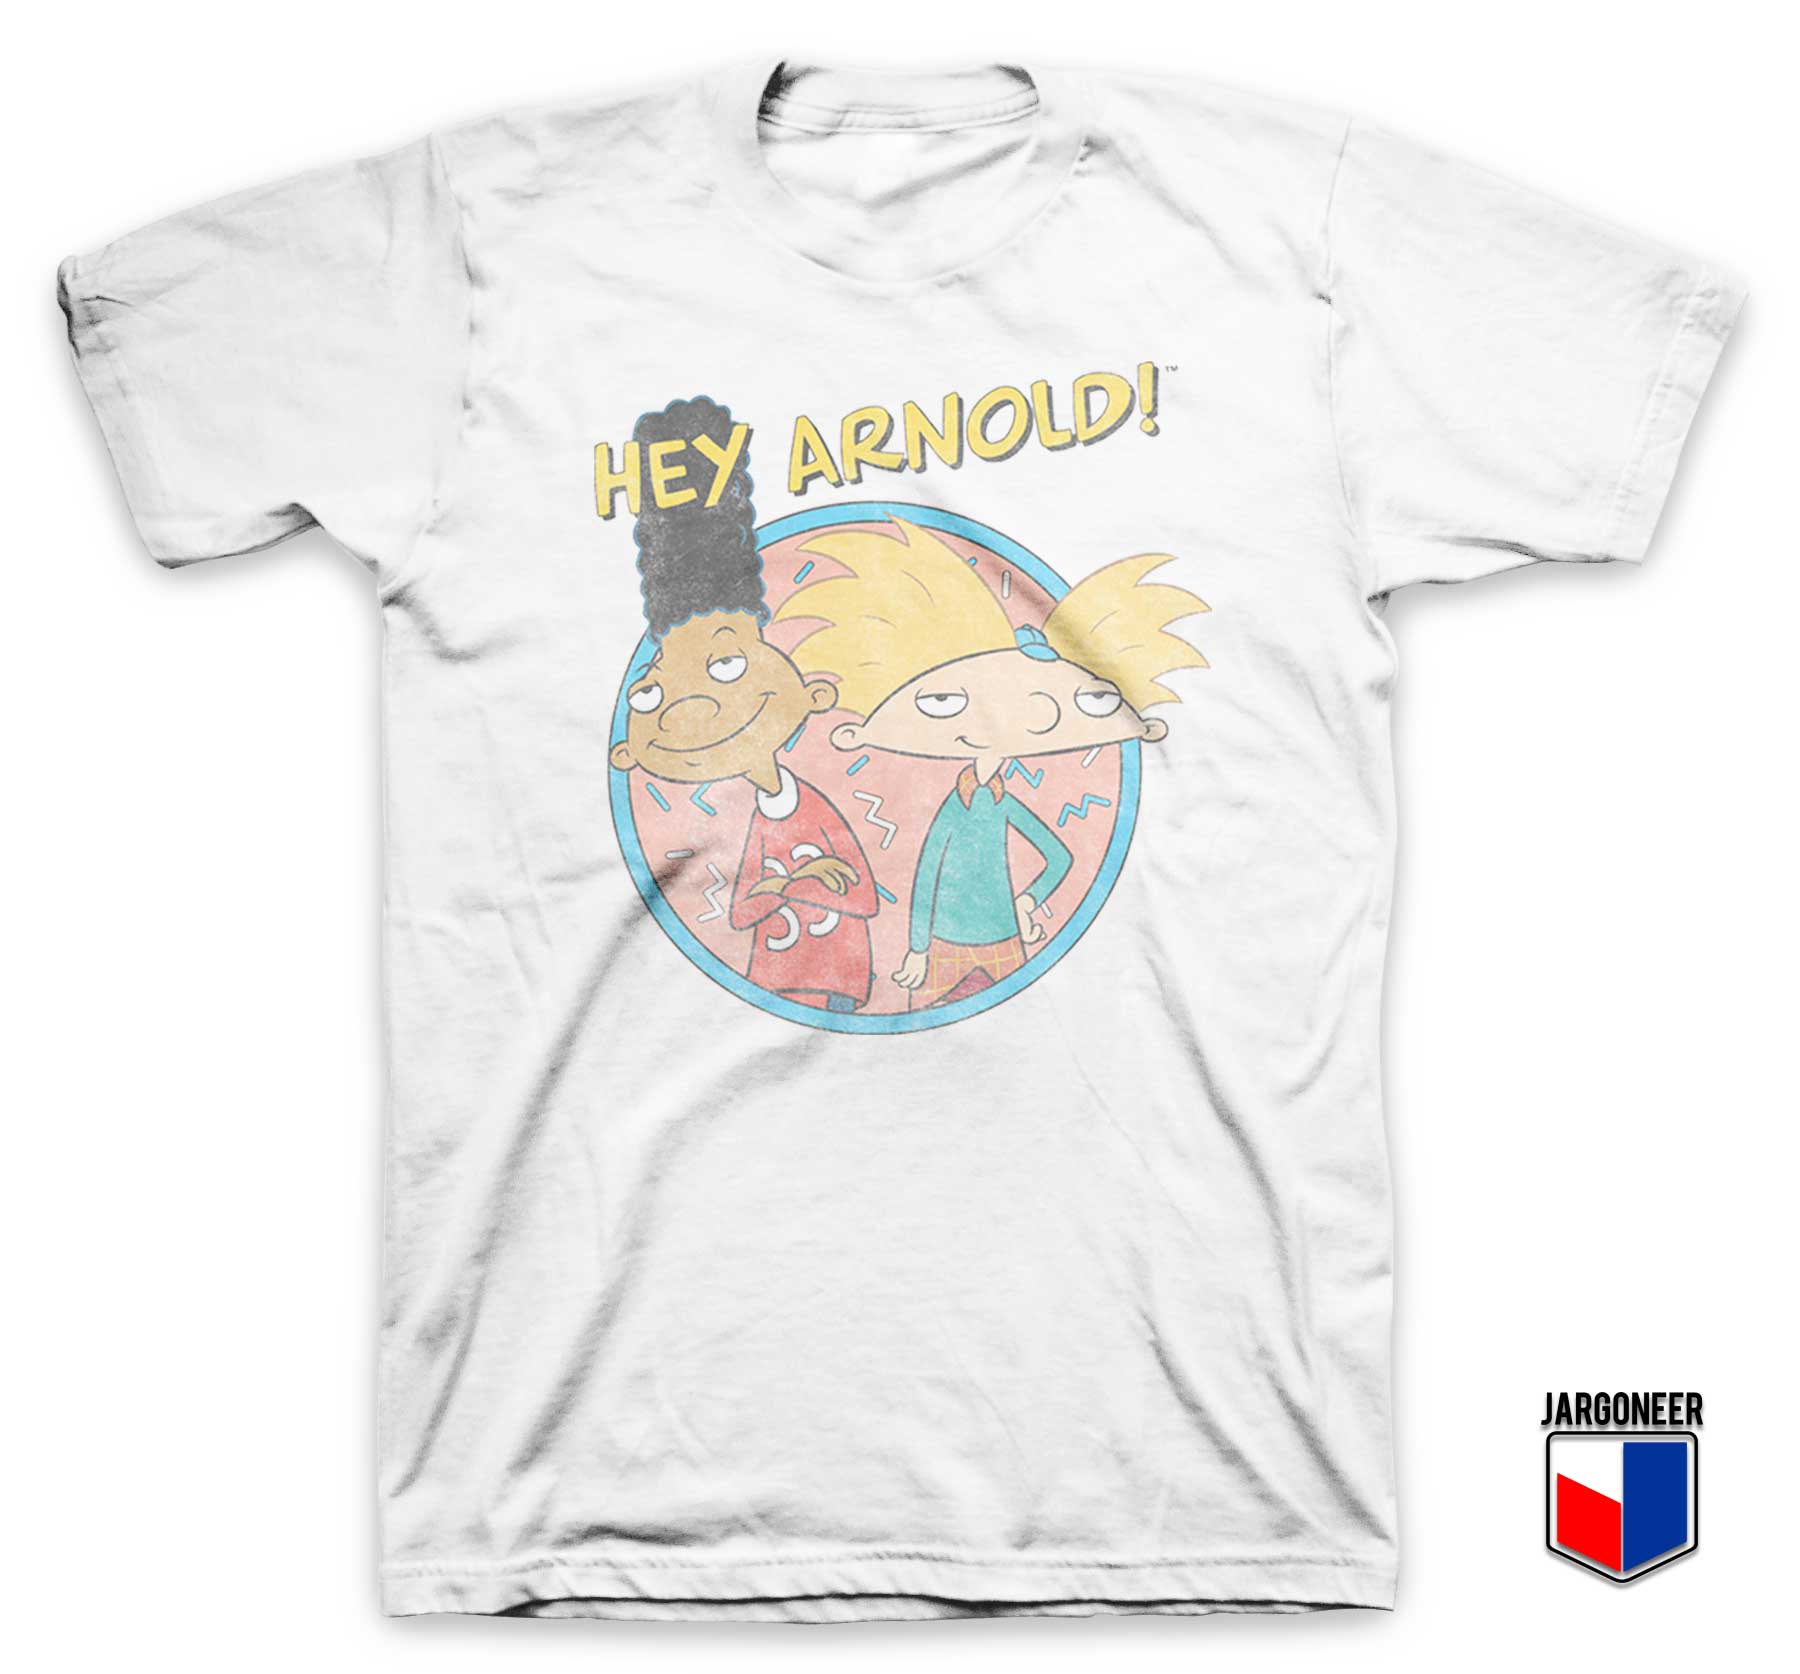 Hey Arnold And Gerald T Shirt - Shop Unique Graphic Cool Shirt Designs